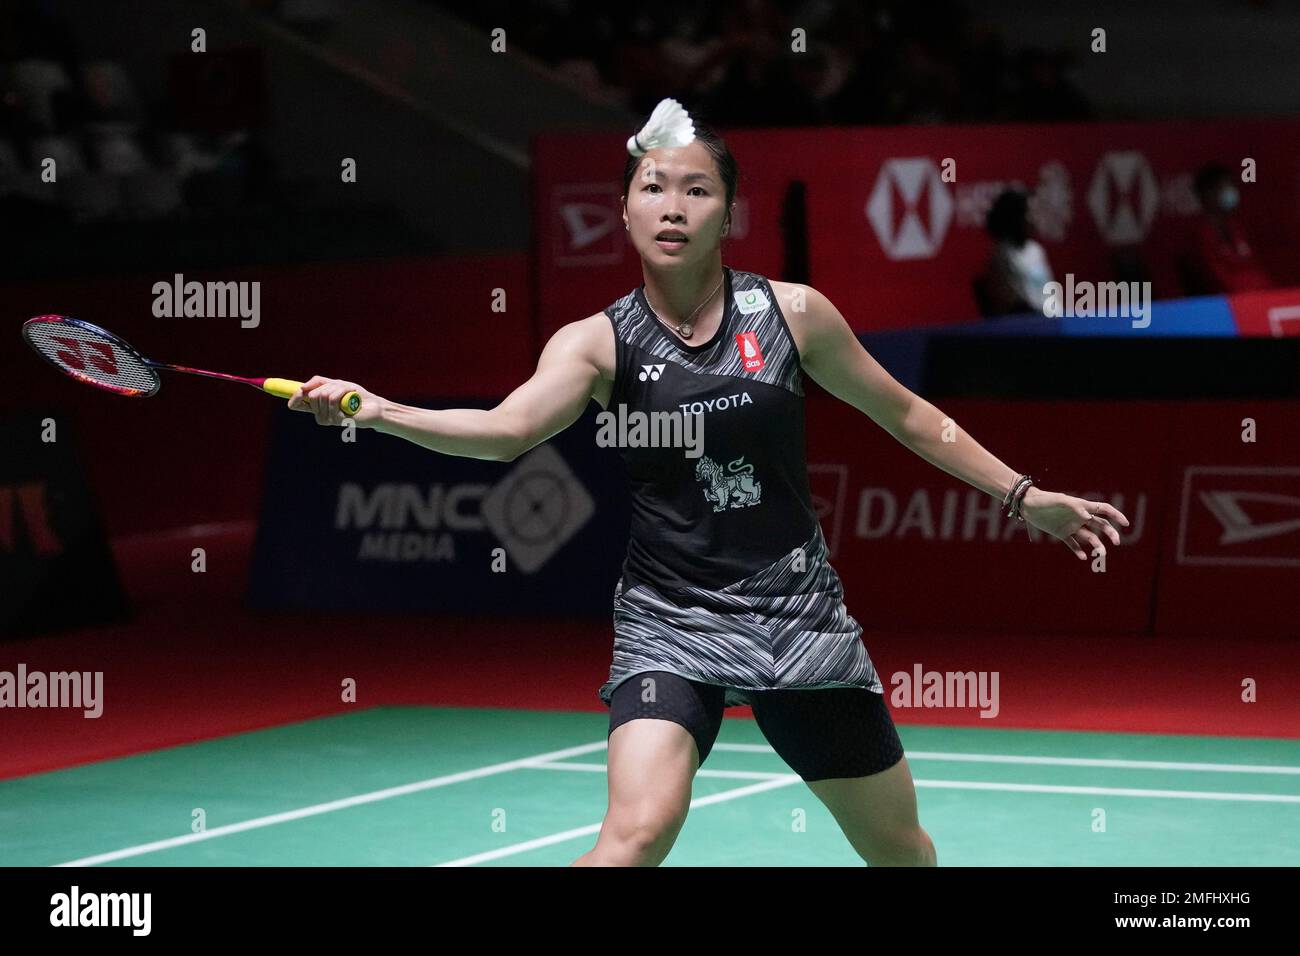 Ratchanok Intanon of Thailand returns a shot to Malvika Bansod of India during the womens single match in the Indonesia Masters badminton tournament in Jakarta, Indonesia, Wednesday, Jan